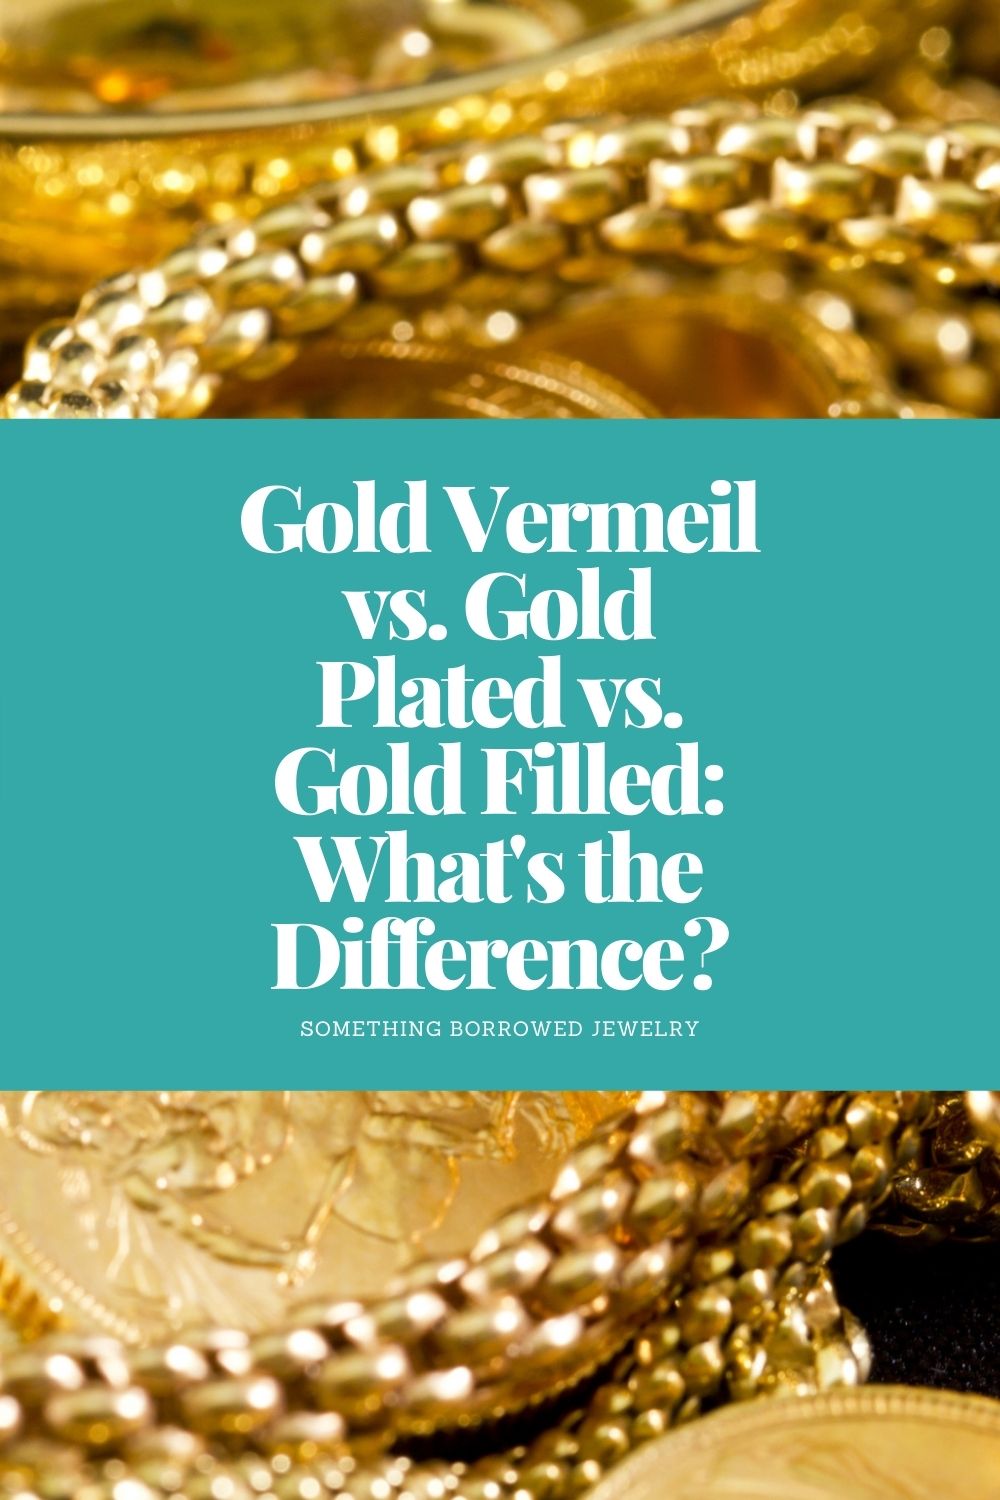 Gold Vermeil vs. Gold Plated vs. Gold Filled What's the Difference pin